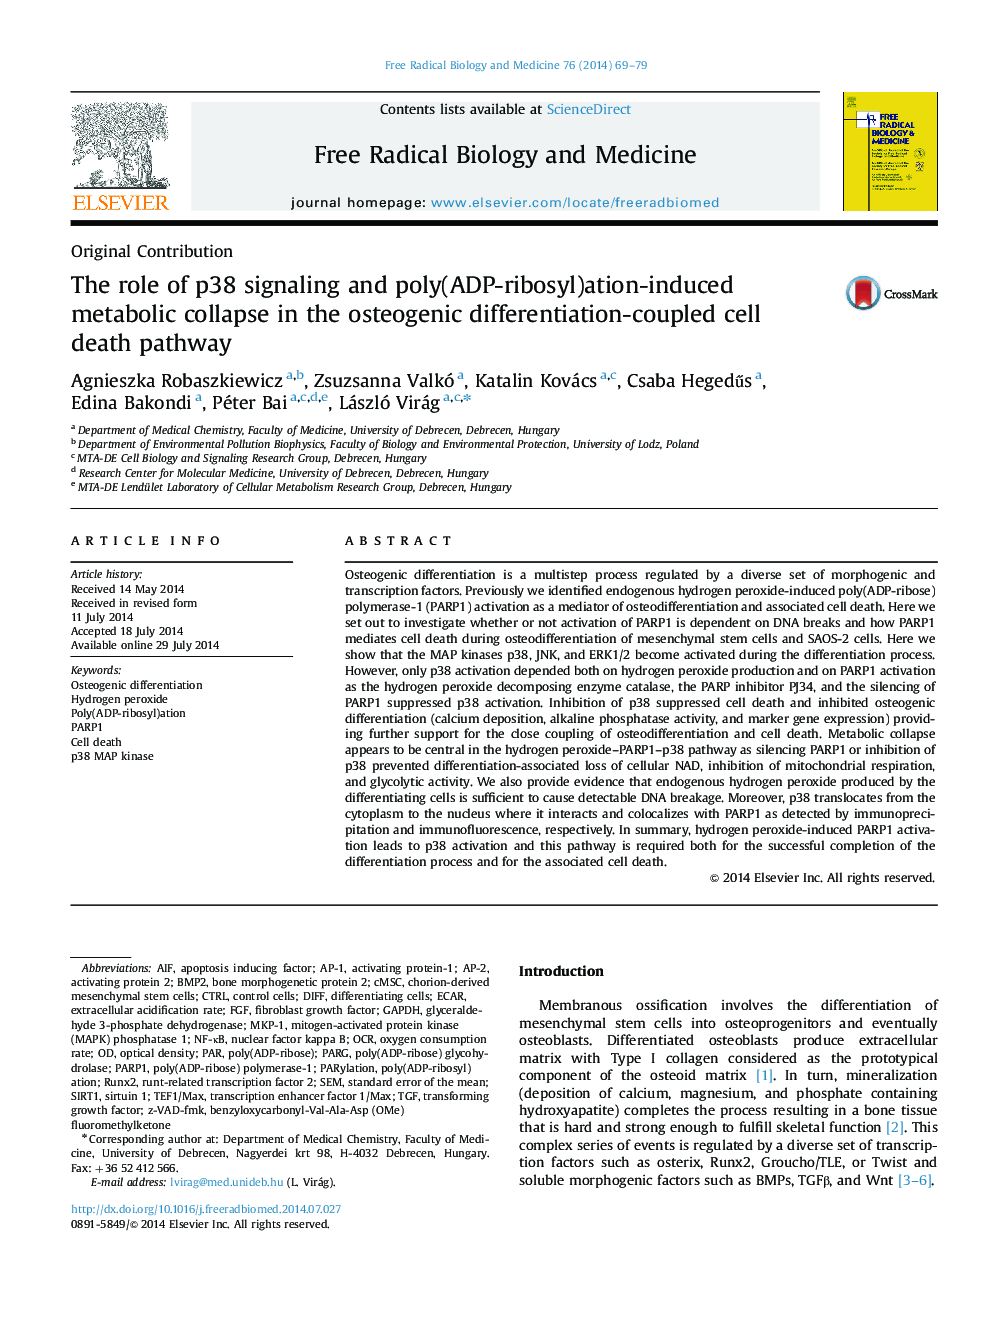 The role of p38 signaling and poly(ADP-ribosyl)ation-induced metabolic collapse in the osteogenic differentiation-coupled cell death pathway